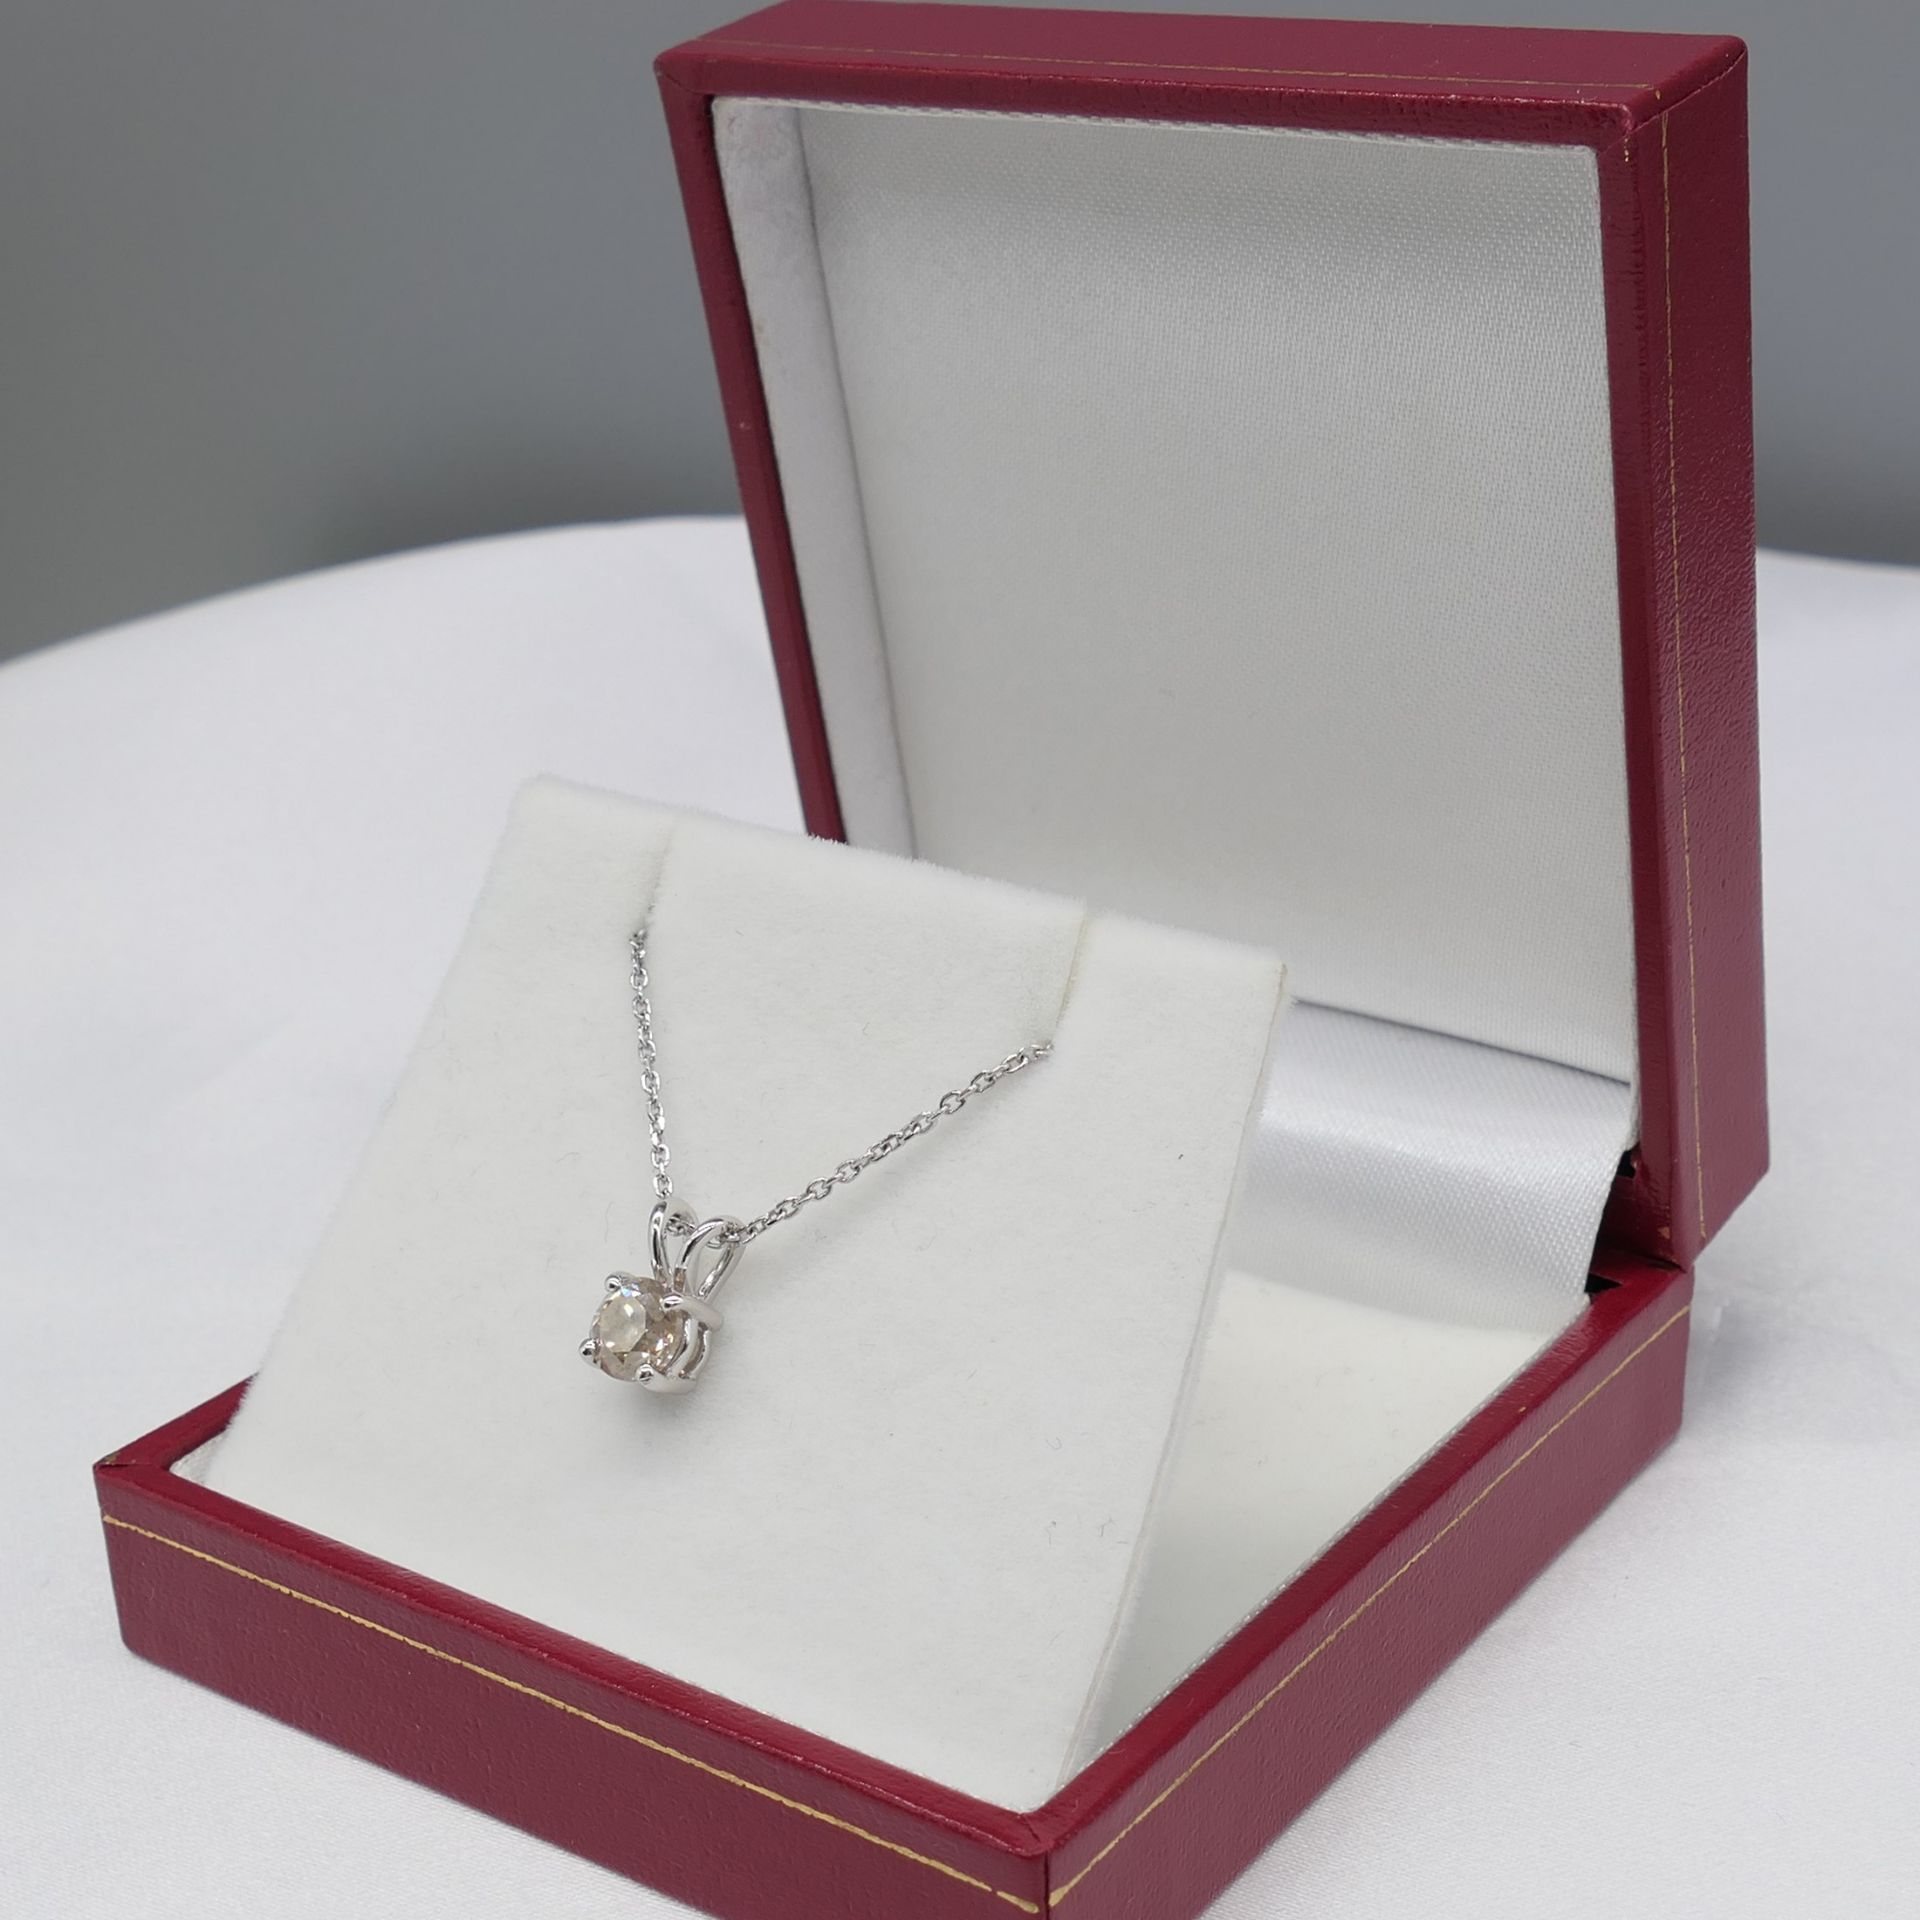 18ct White Gold 0.74 Carat Diamond Solitaire Pendant With Chain, Boxed - Image 7 of 7